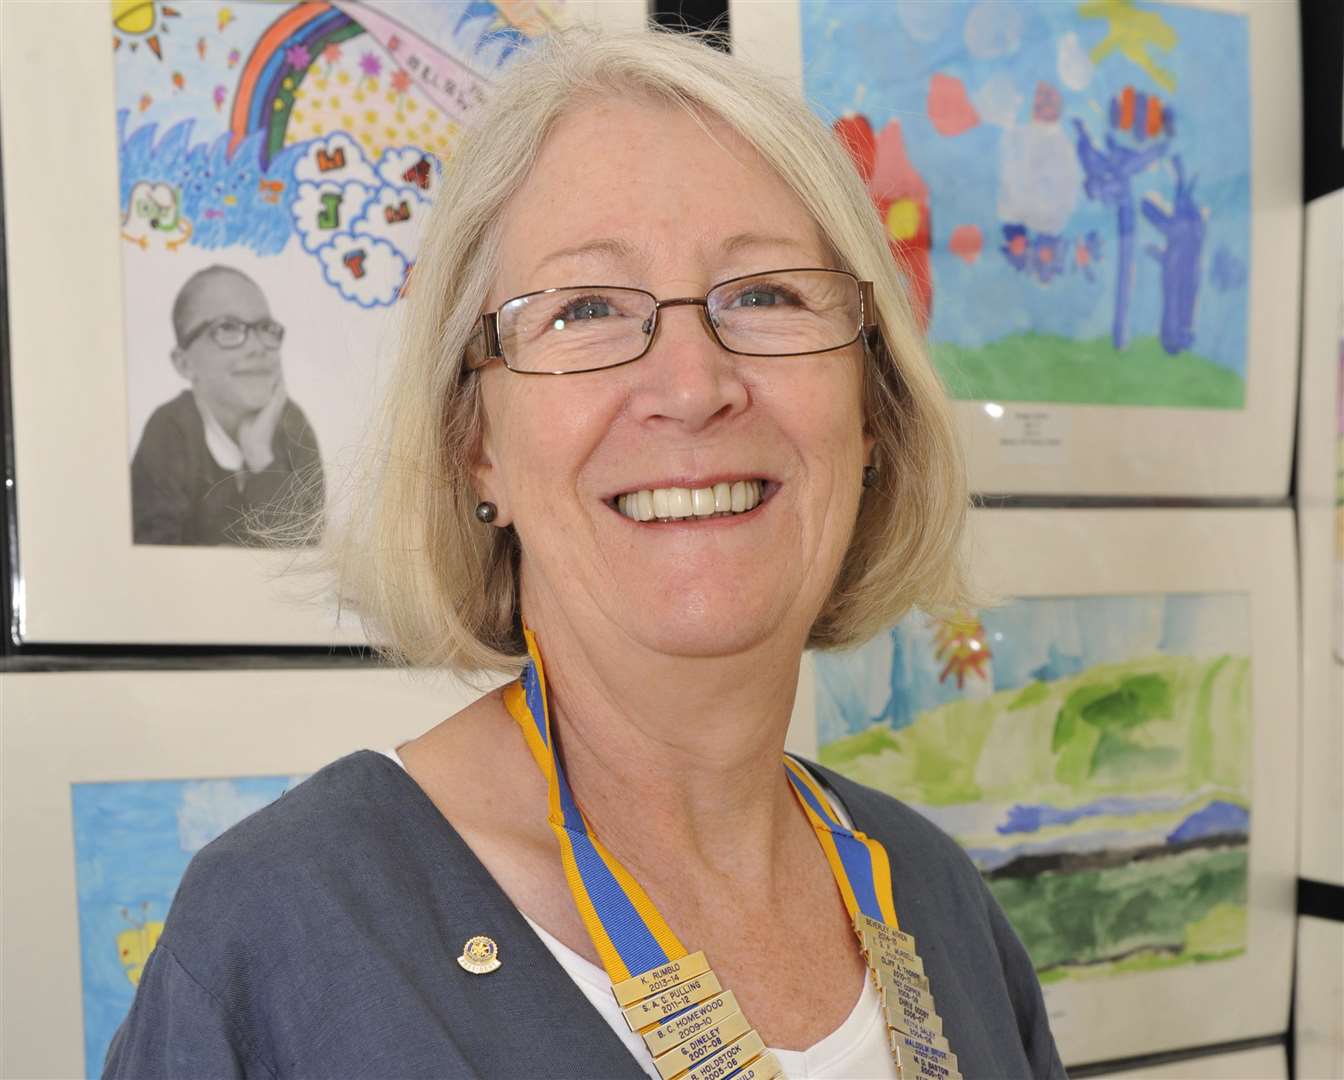 Beverley Aitken, who is the current treasurer of the Margate Rotary Club, and was also its president between 2014-15. Picture: Tony Flashman